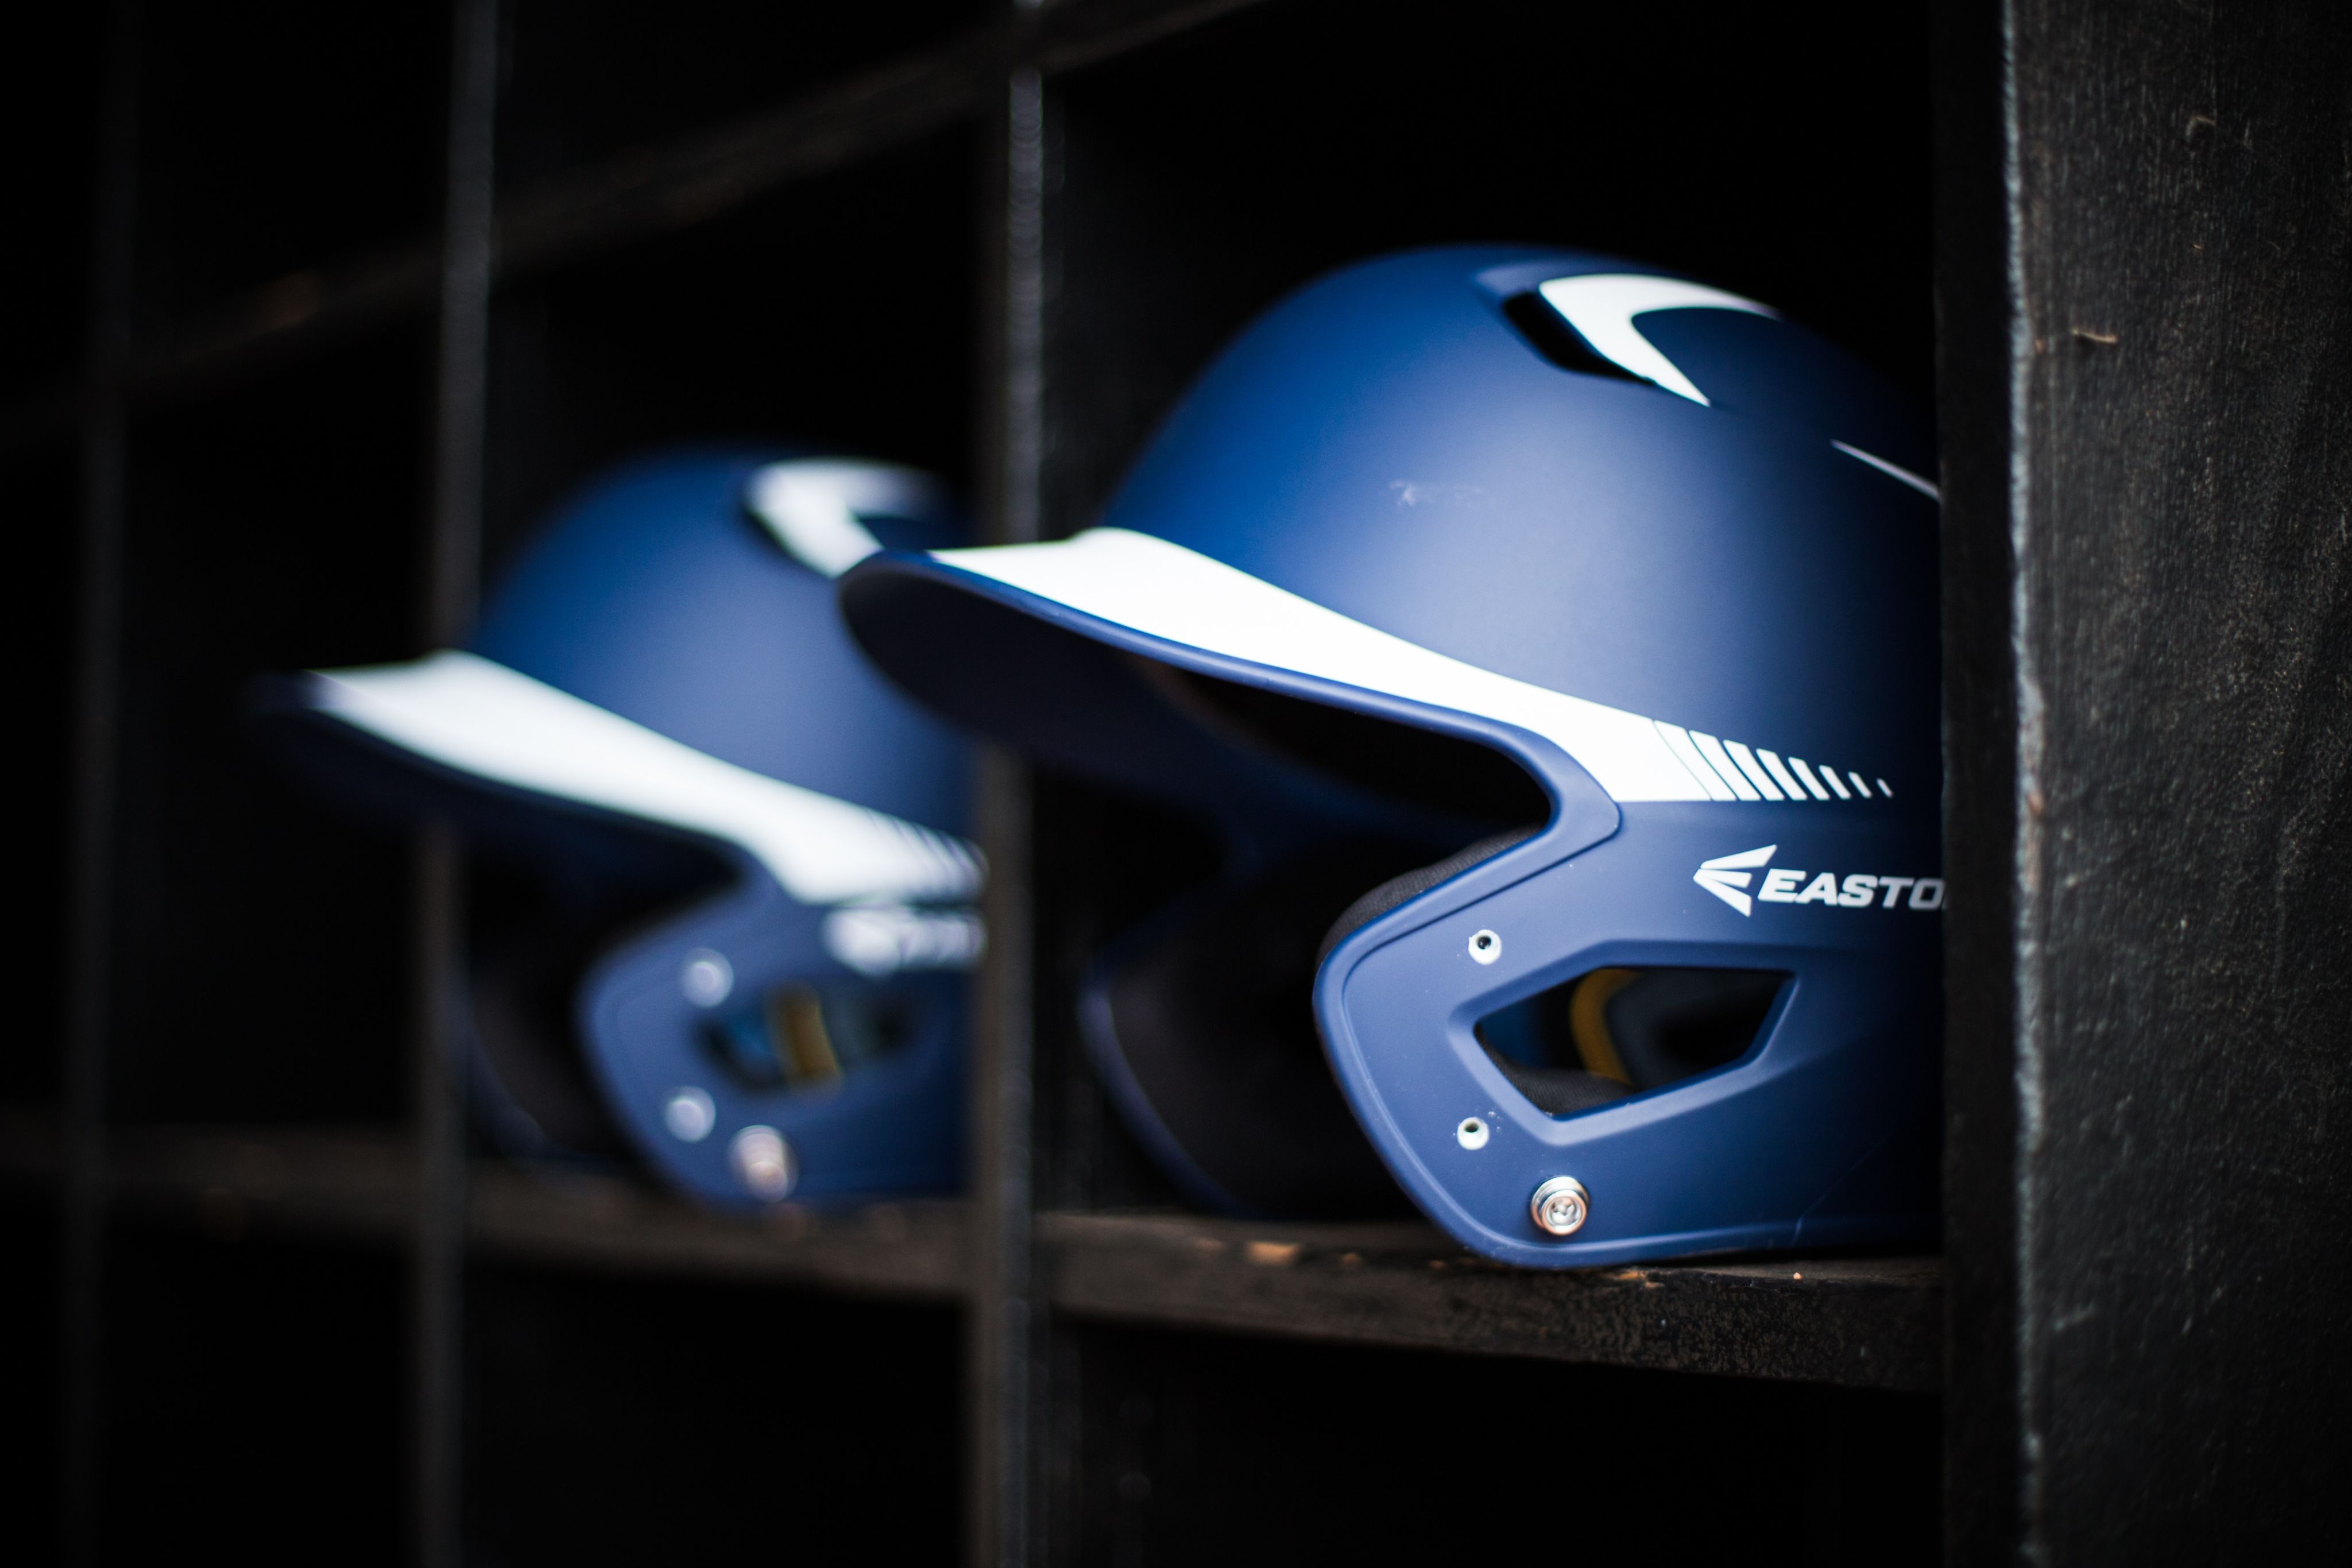 Two blue Easton-branded batting helmets with white graphics on the brim